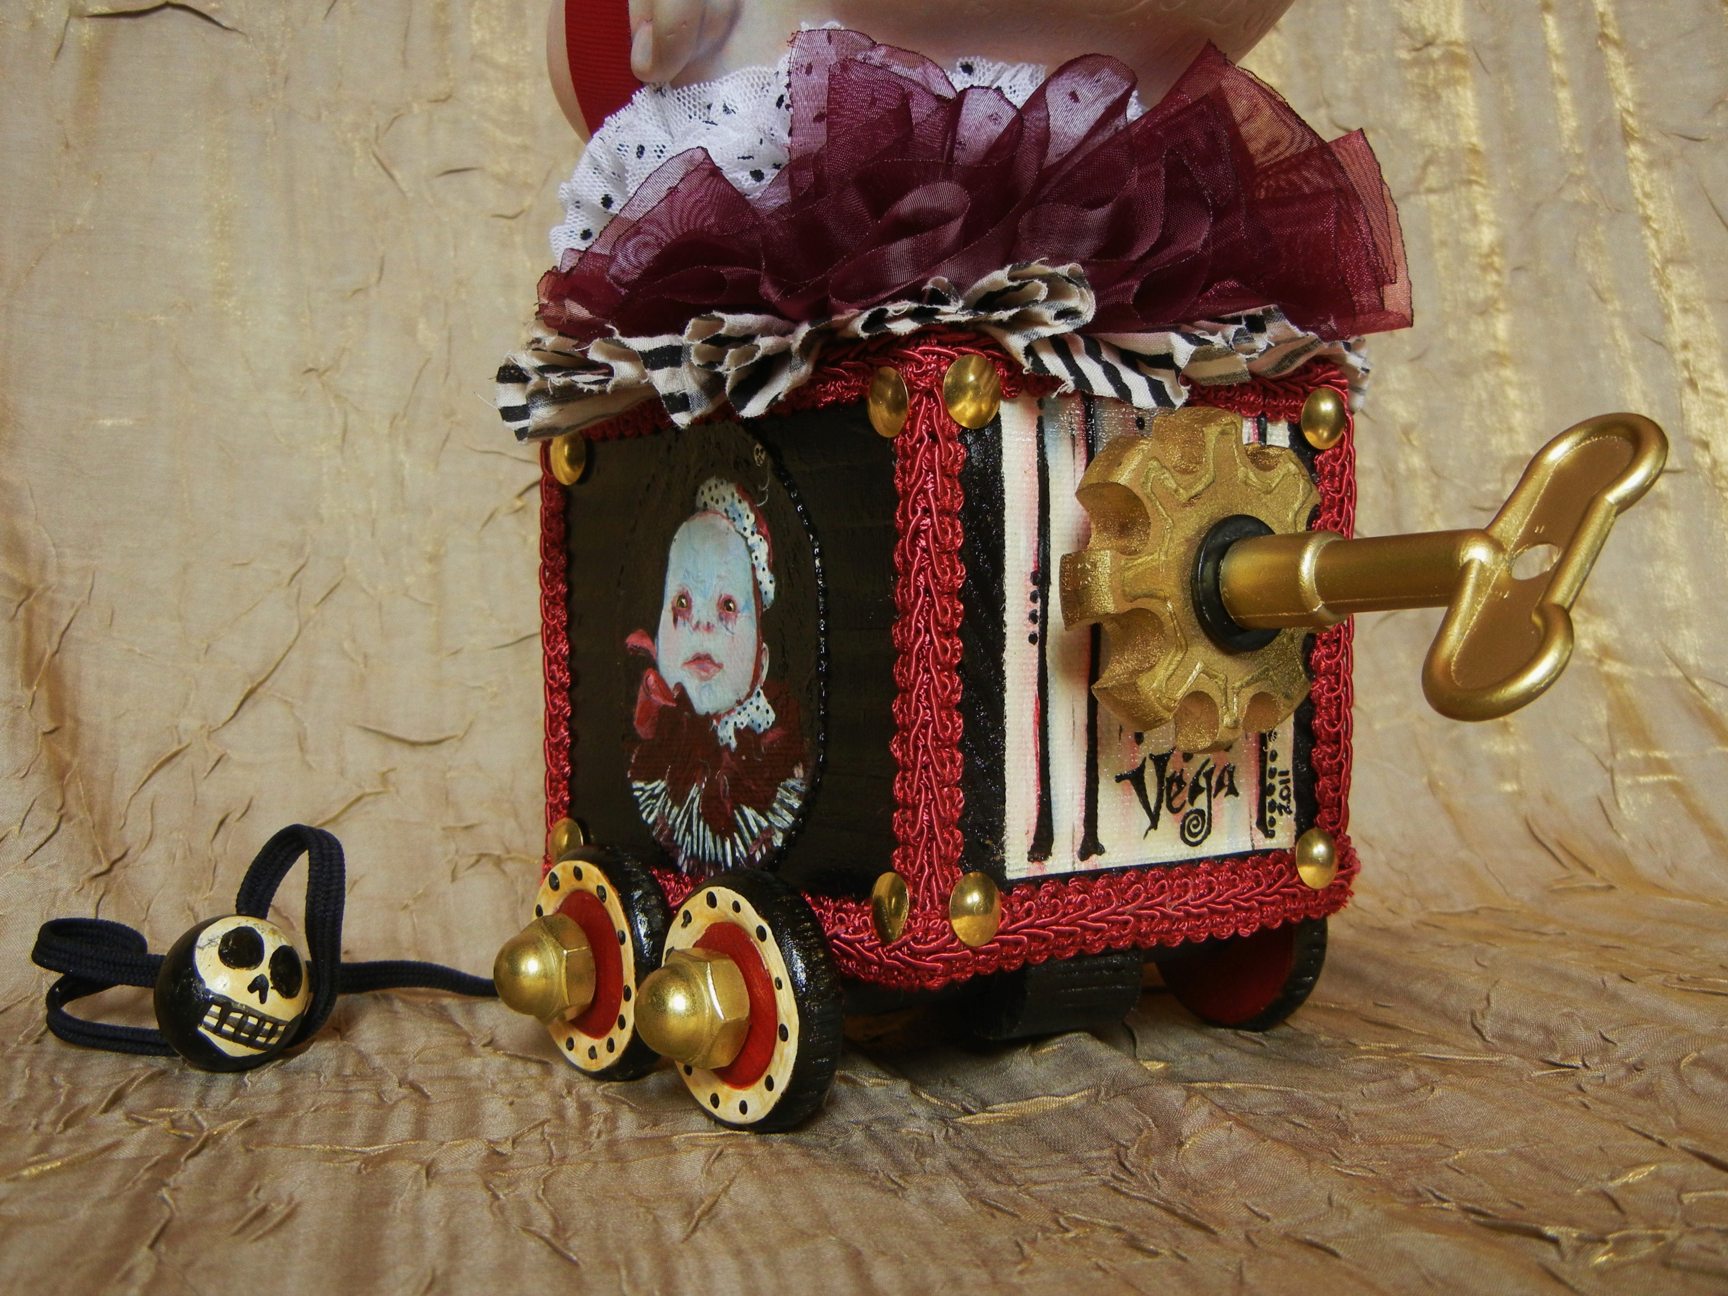 close-up of hand-painted circus pull cart toy red and black with wind-up key music box